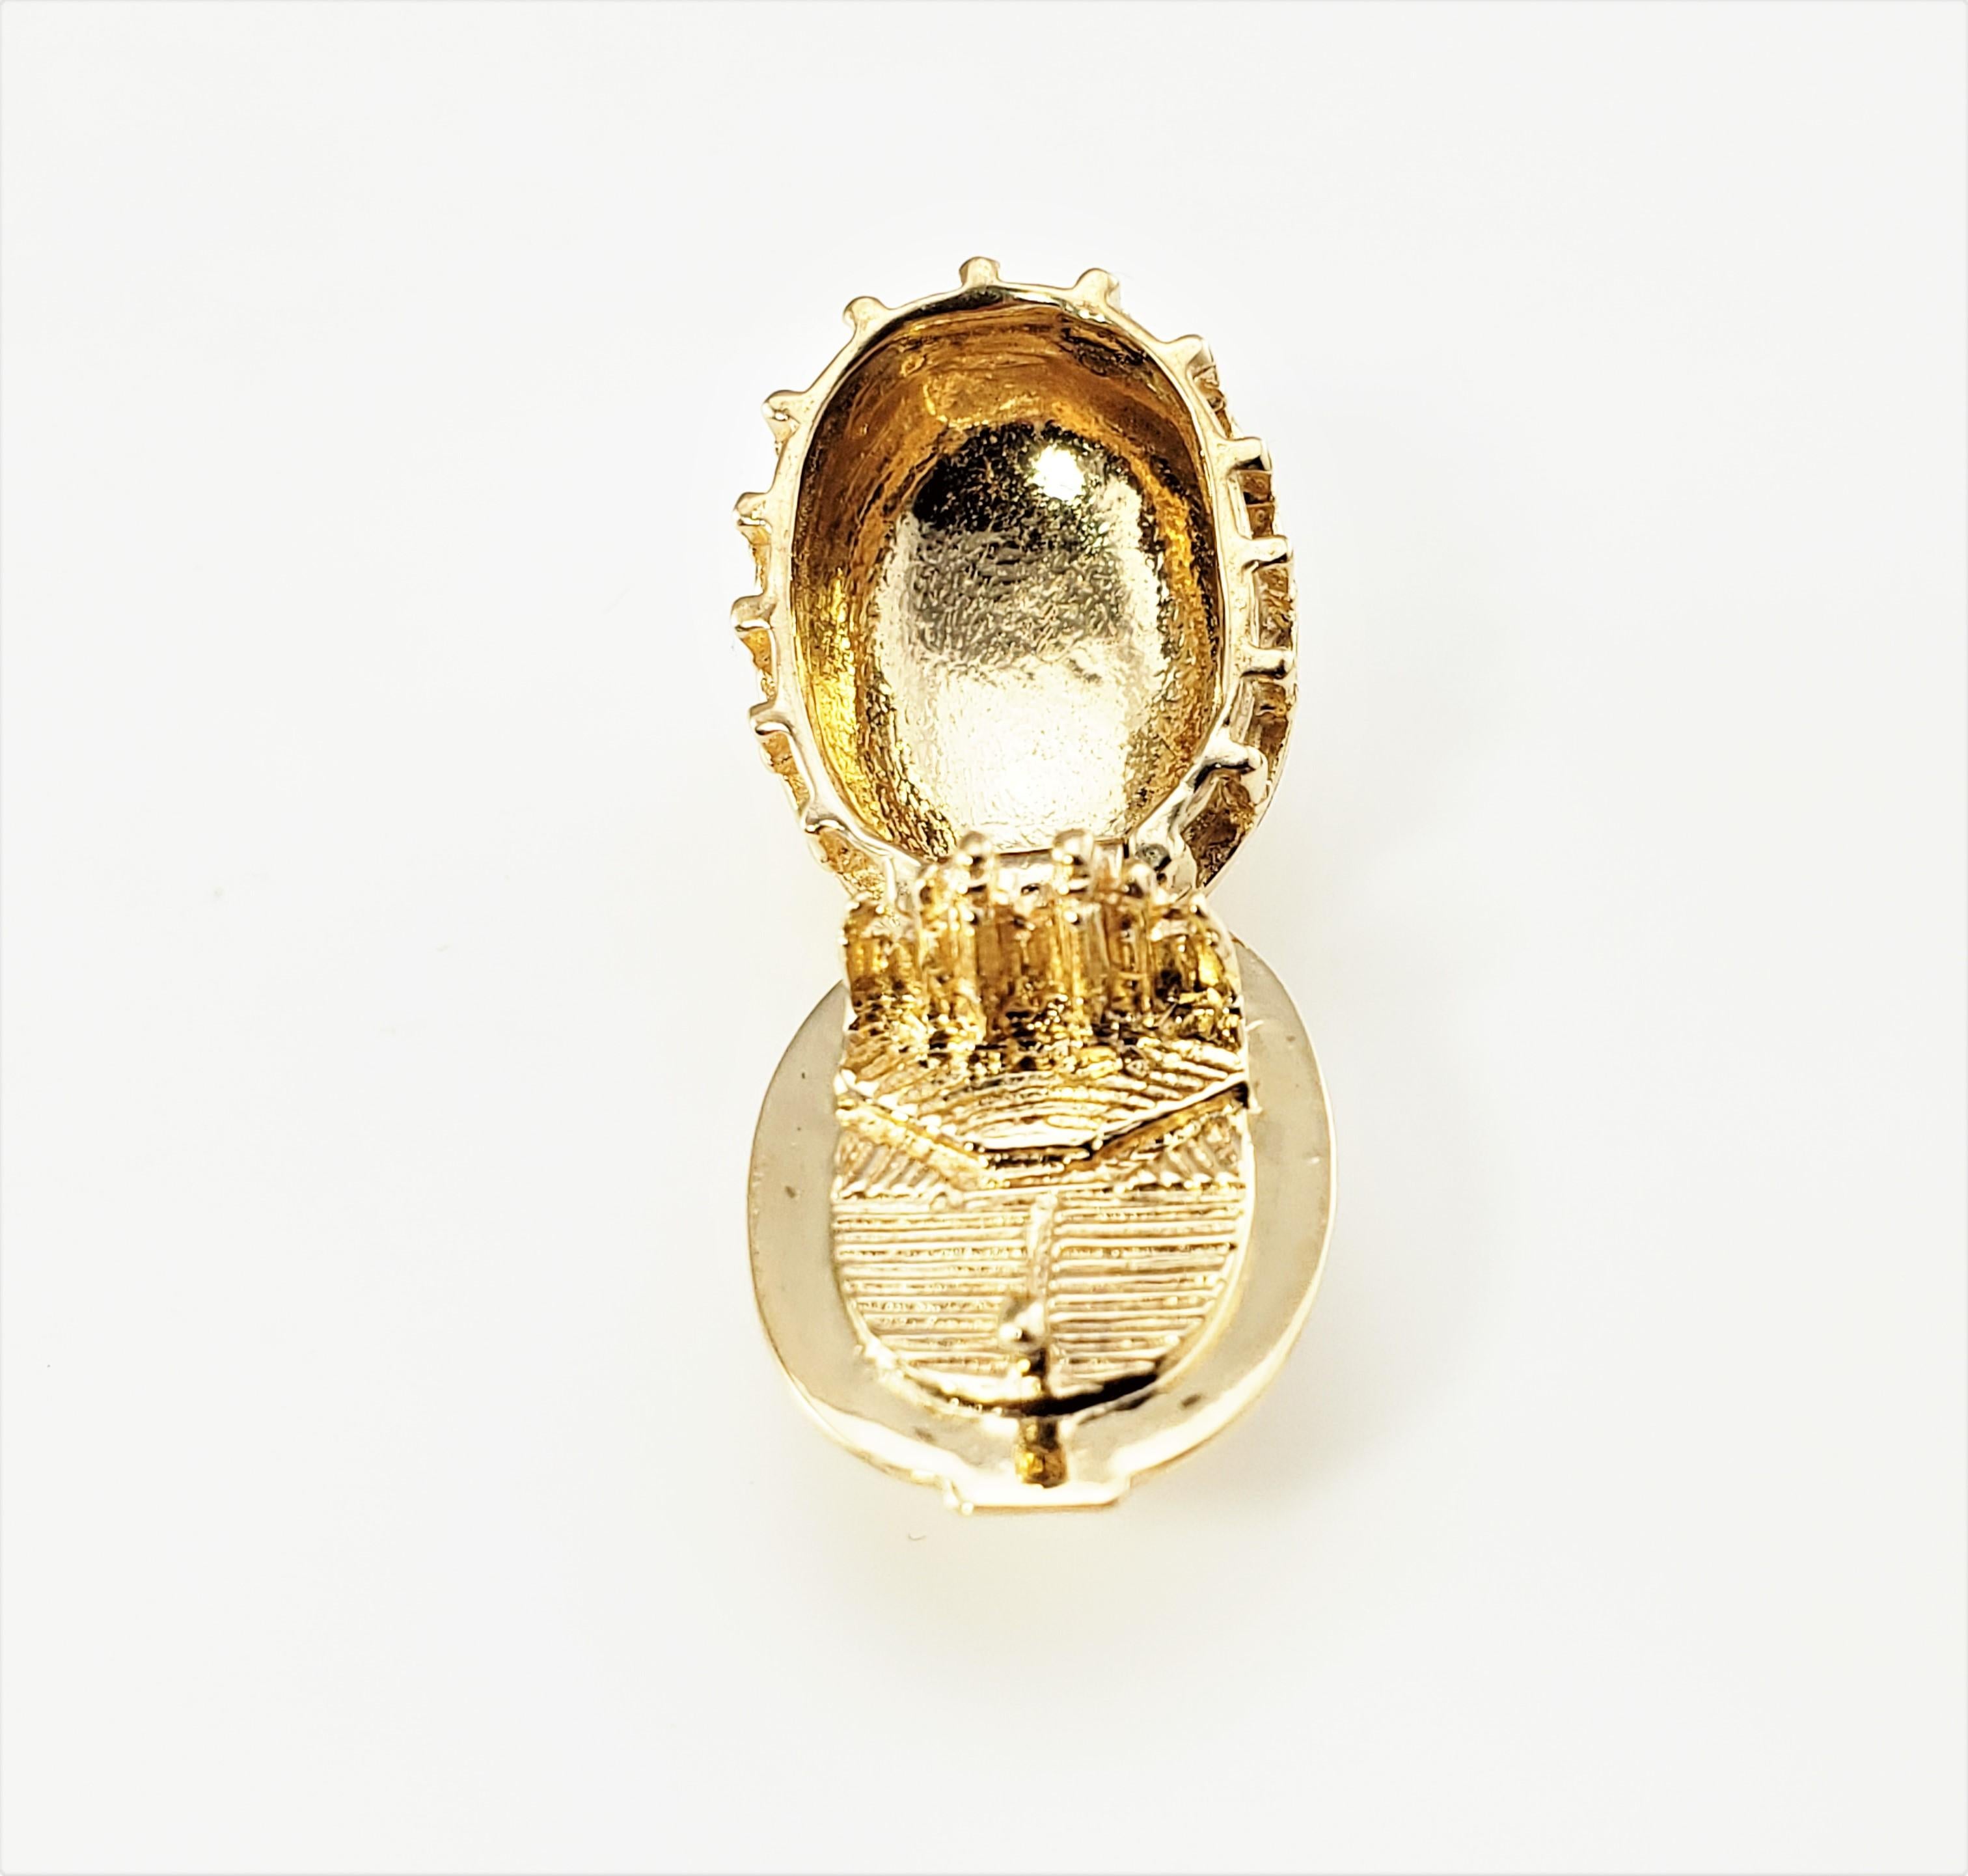 14 Karat Yellow Gold Mormon Tabernacle Mechanical Charm-

The Salt Lake Tabernacle was designed for large gatherings and events for The Church of Jesus Christ Latter-day Saints.

This lovely hinged charm opens to reveal the temple meticulously